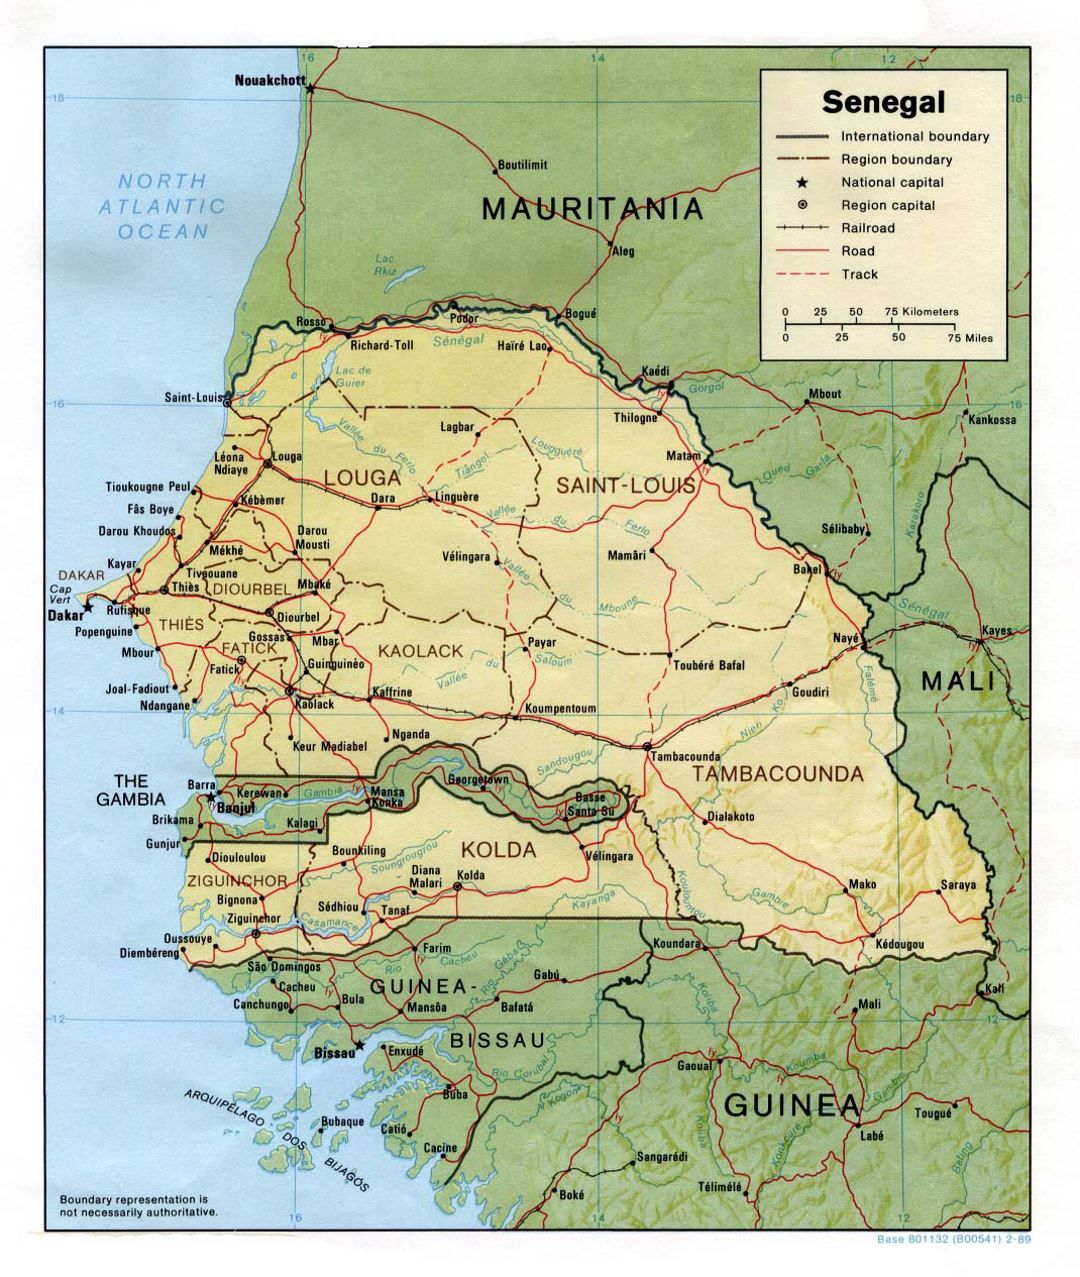 Detailed political and administrative map of Senegal with relief, roads, railroads and major cities - 1989